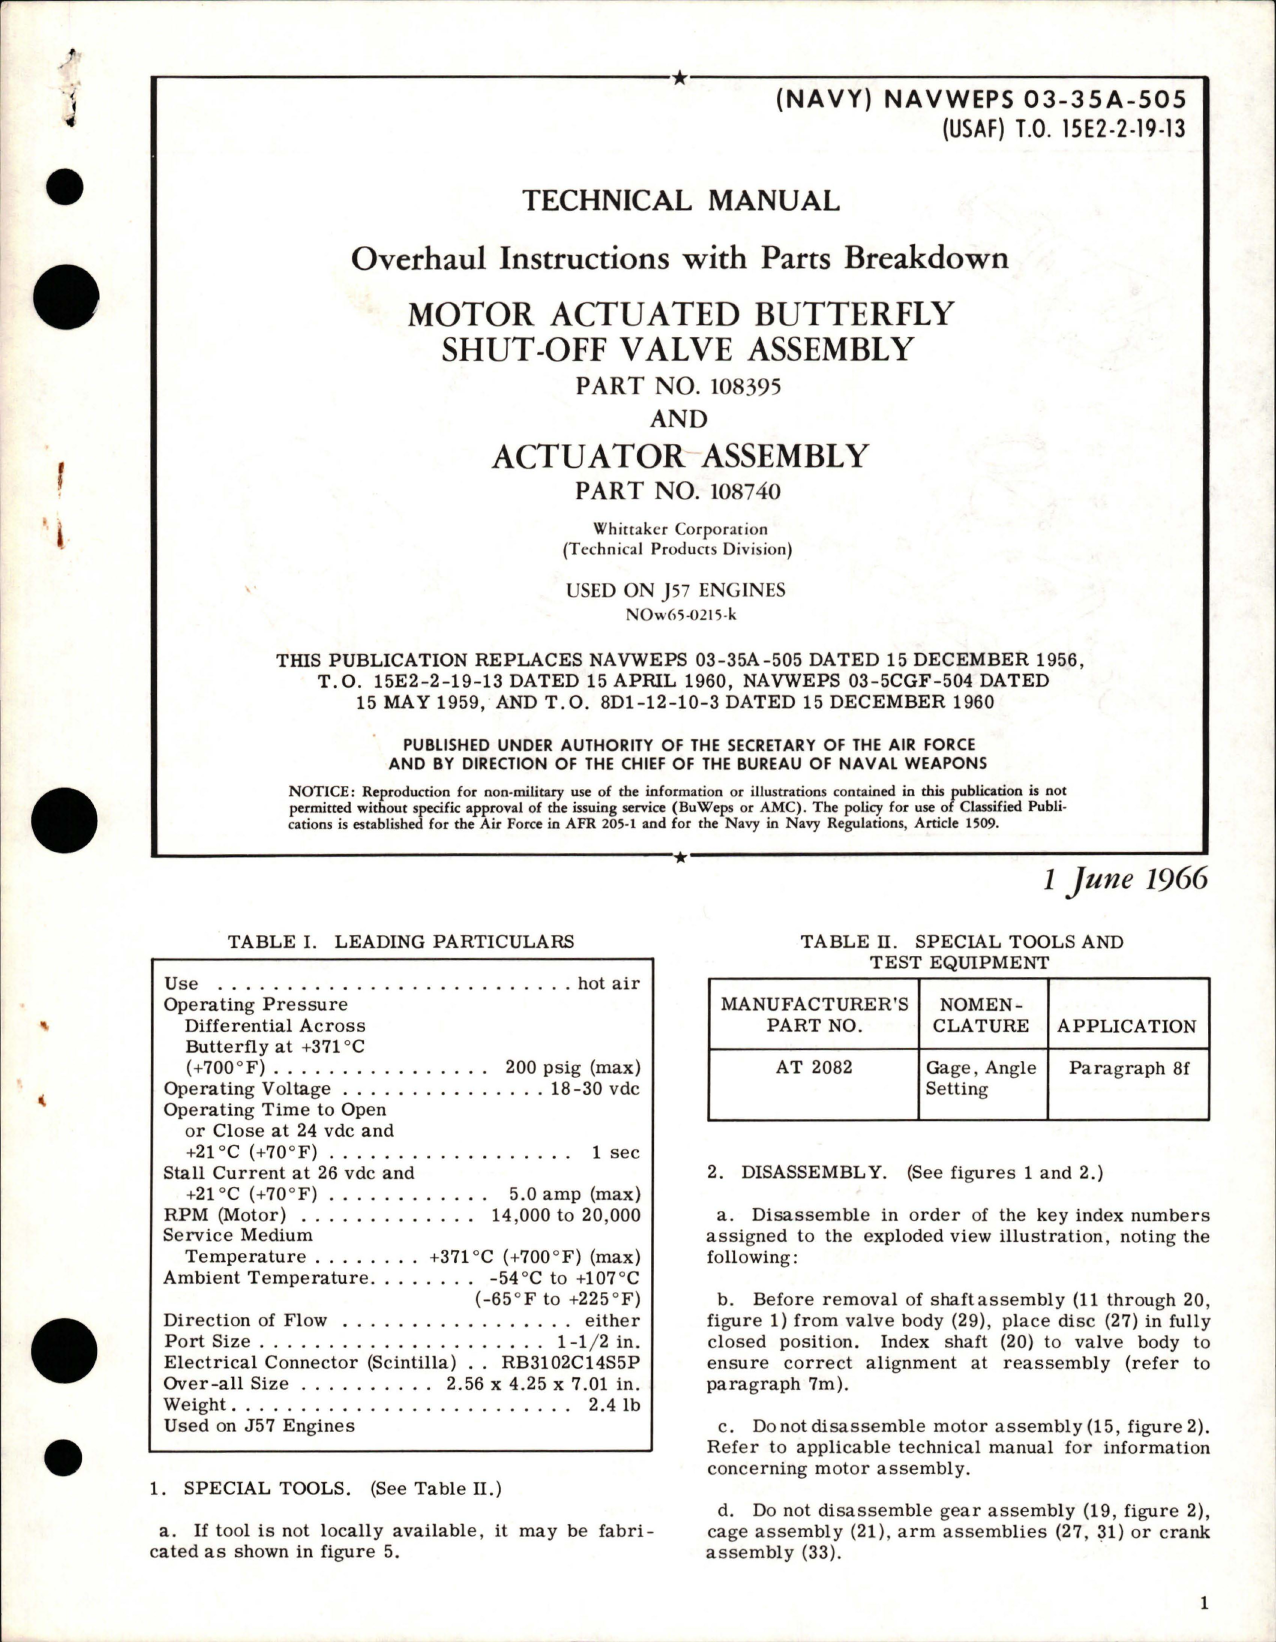 Sample page 1 from AirCorps Library document: Overhaul Instructions with Parts Breakdown for Motor Actuated Butterfly Shut-Off Valve Assembly and Actuator Assembly 